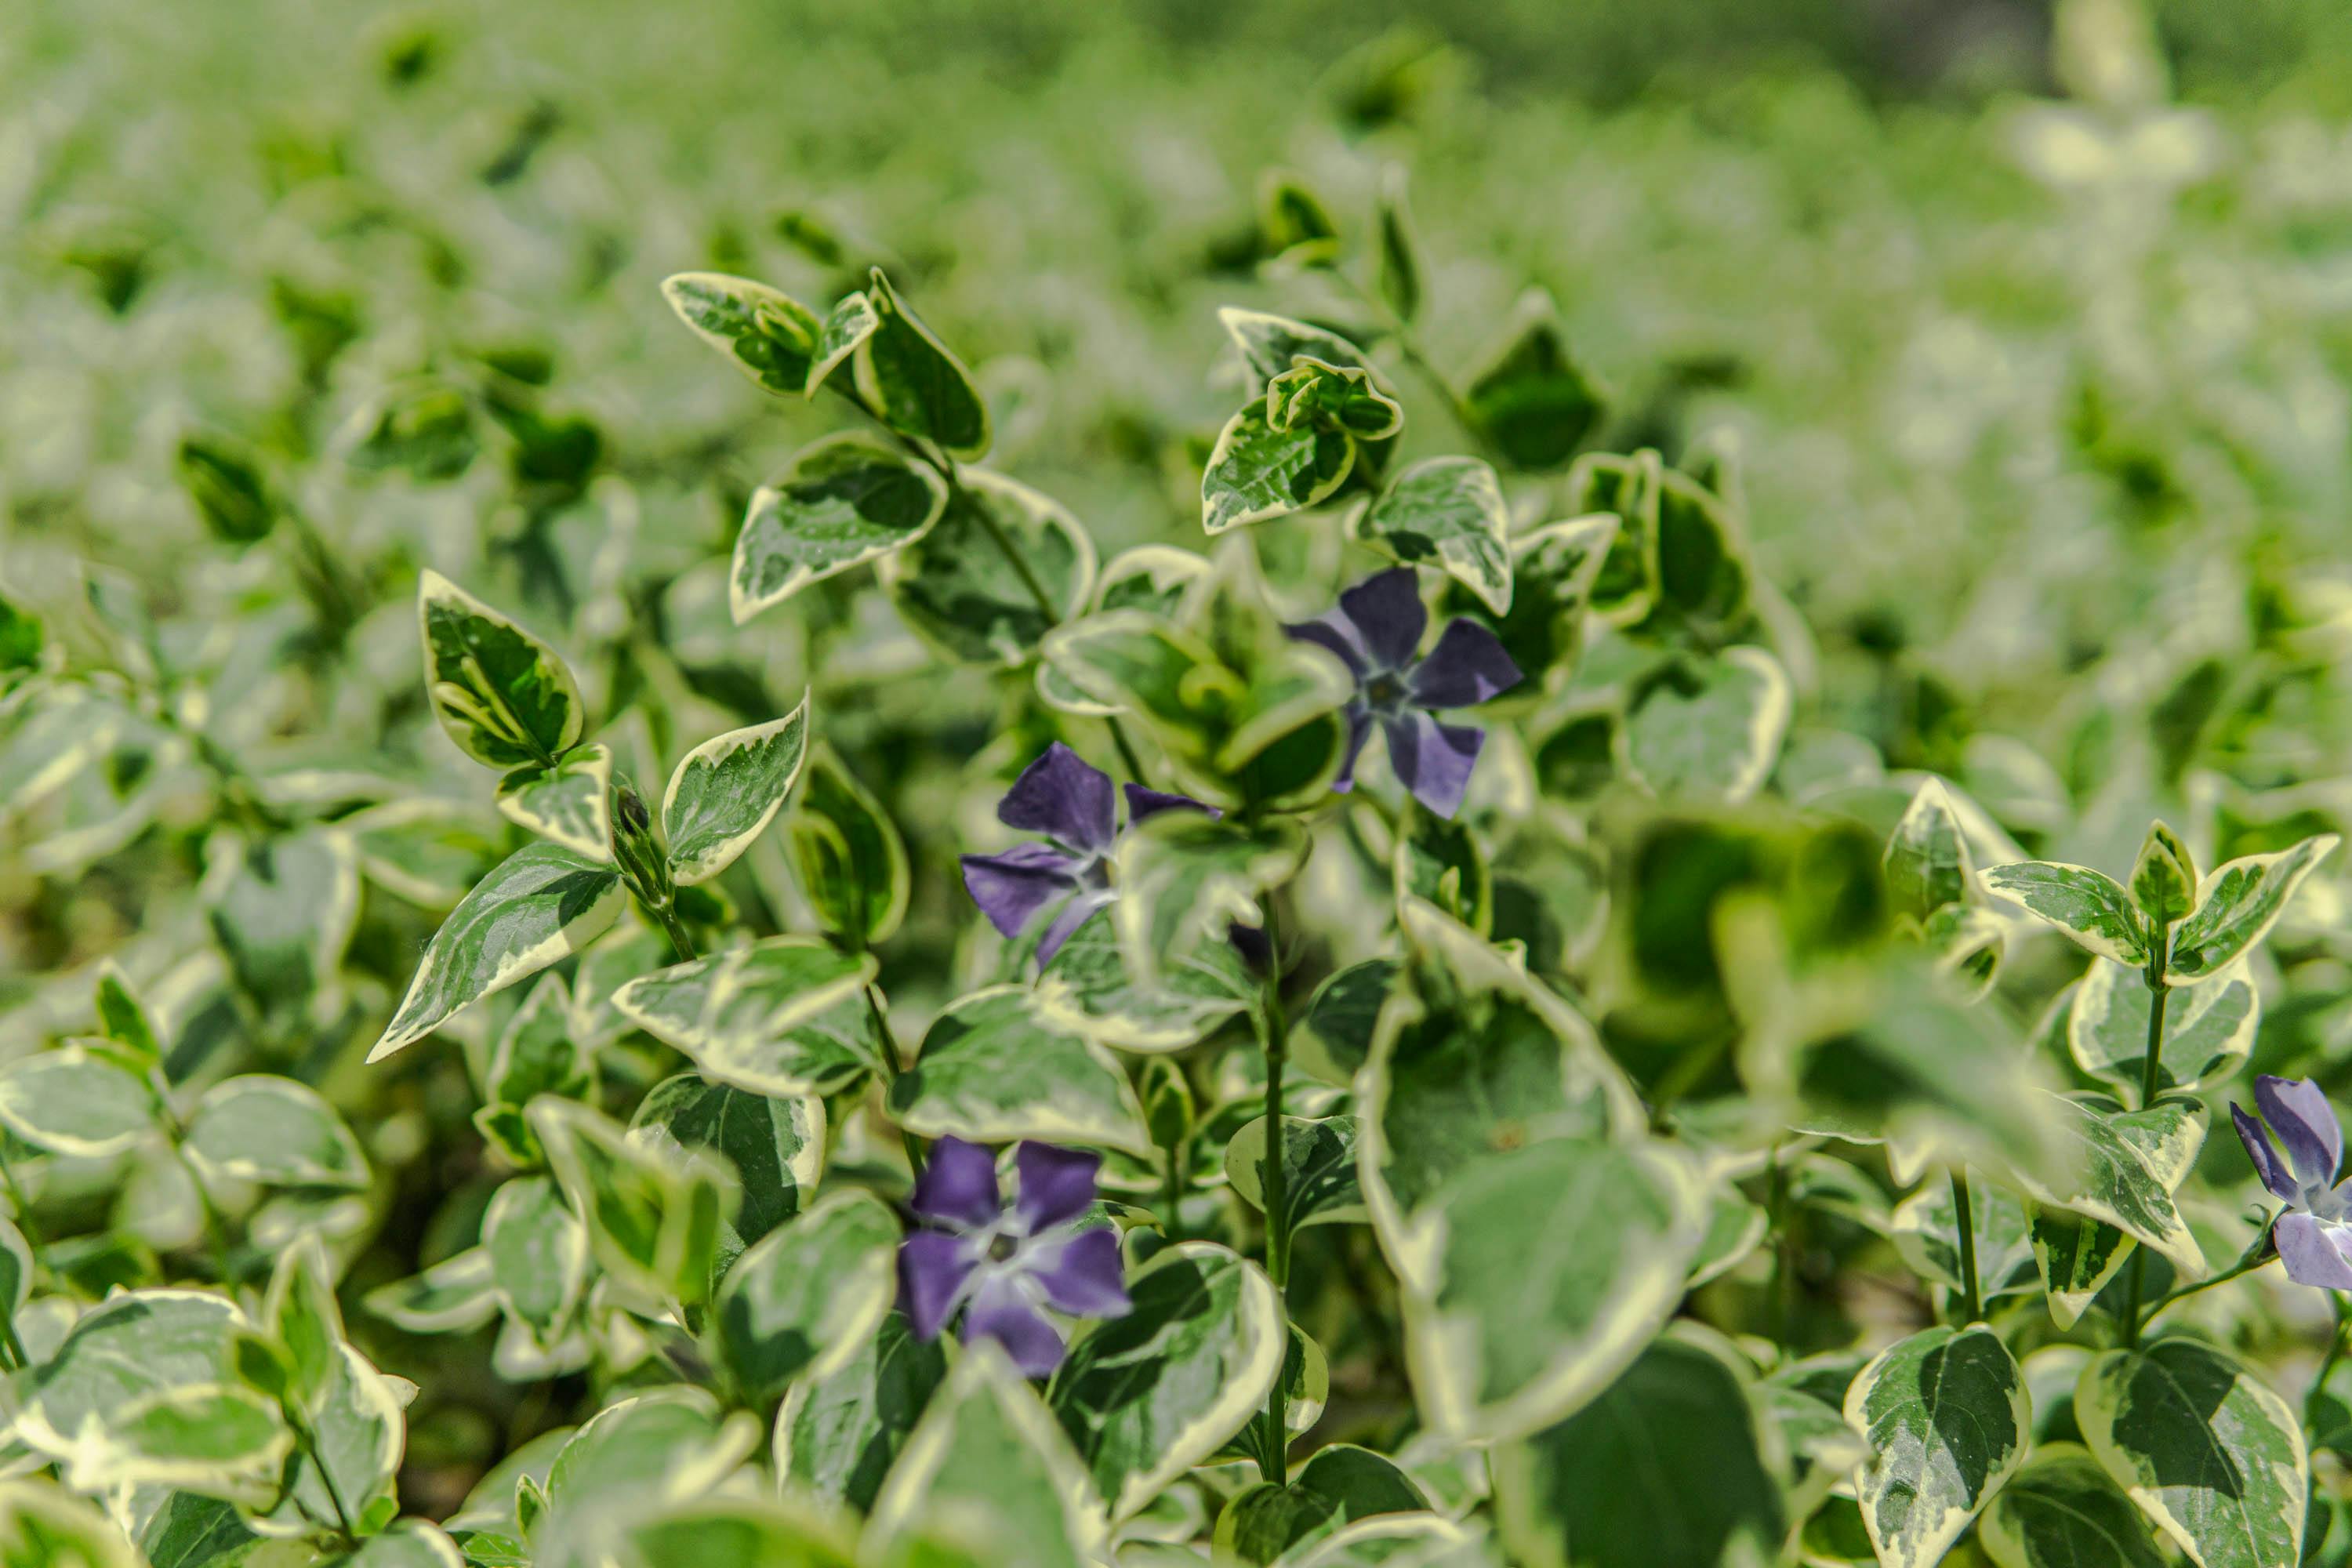 A field of green plants with purple flowers